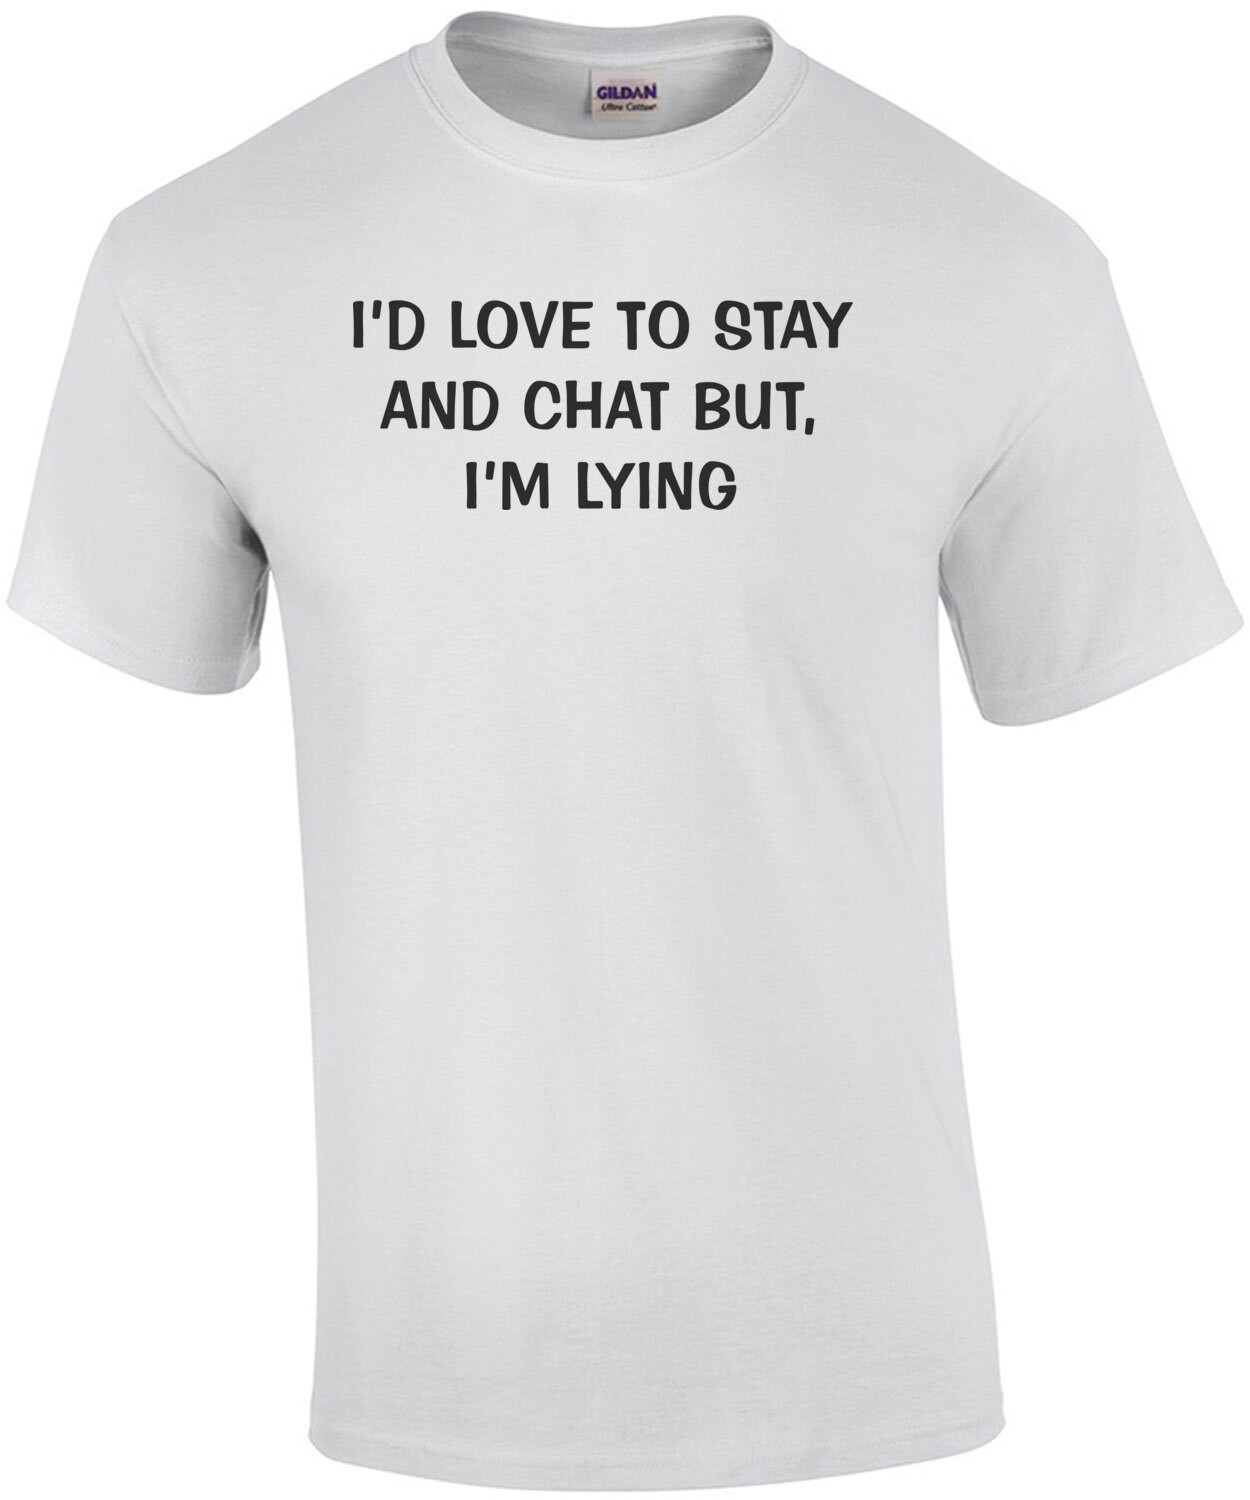 I'd Love To Stay and Chat But, I'm Lying Funny Tee